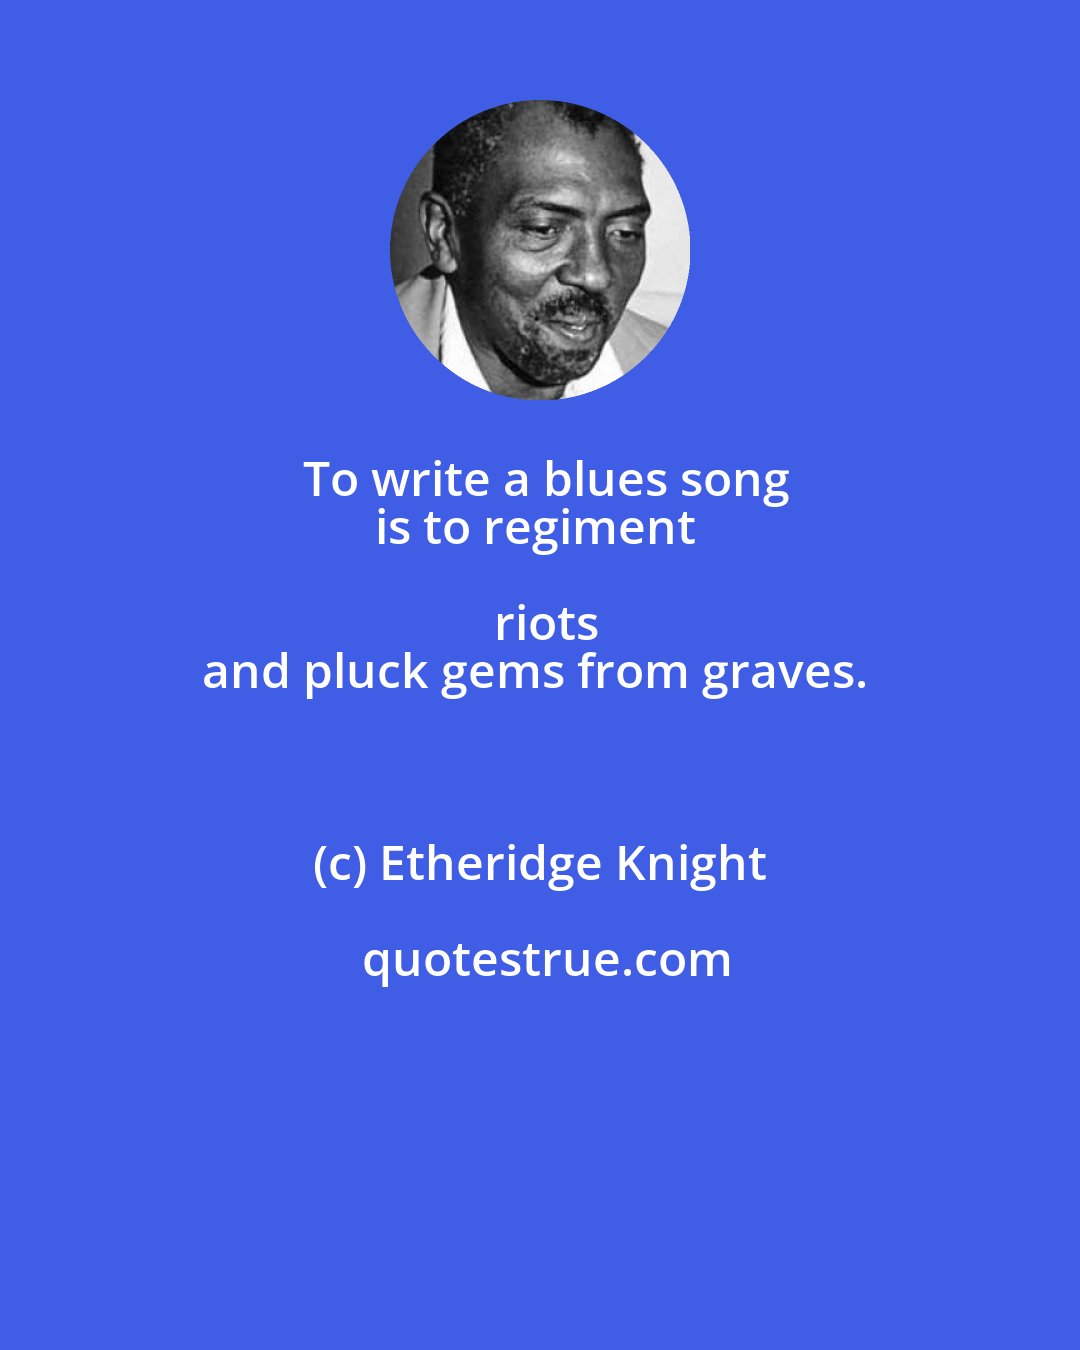 Etheridge Knight: To write a blues song
is to regiment riots
and pluck gems from graves.